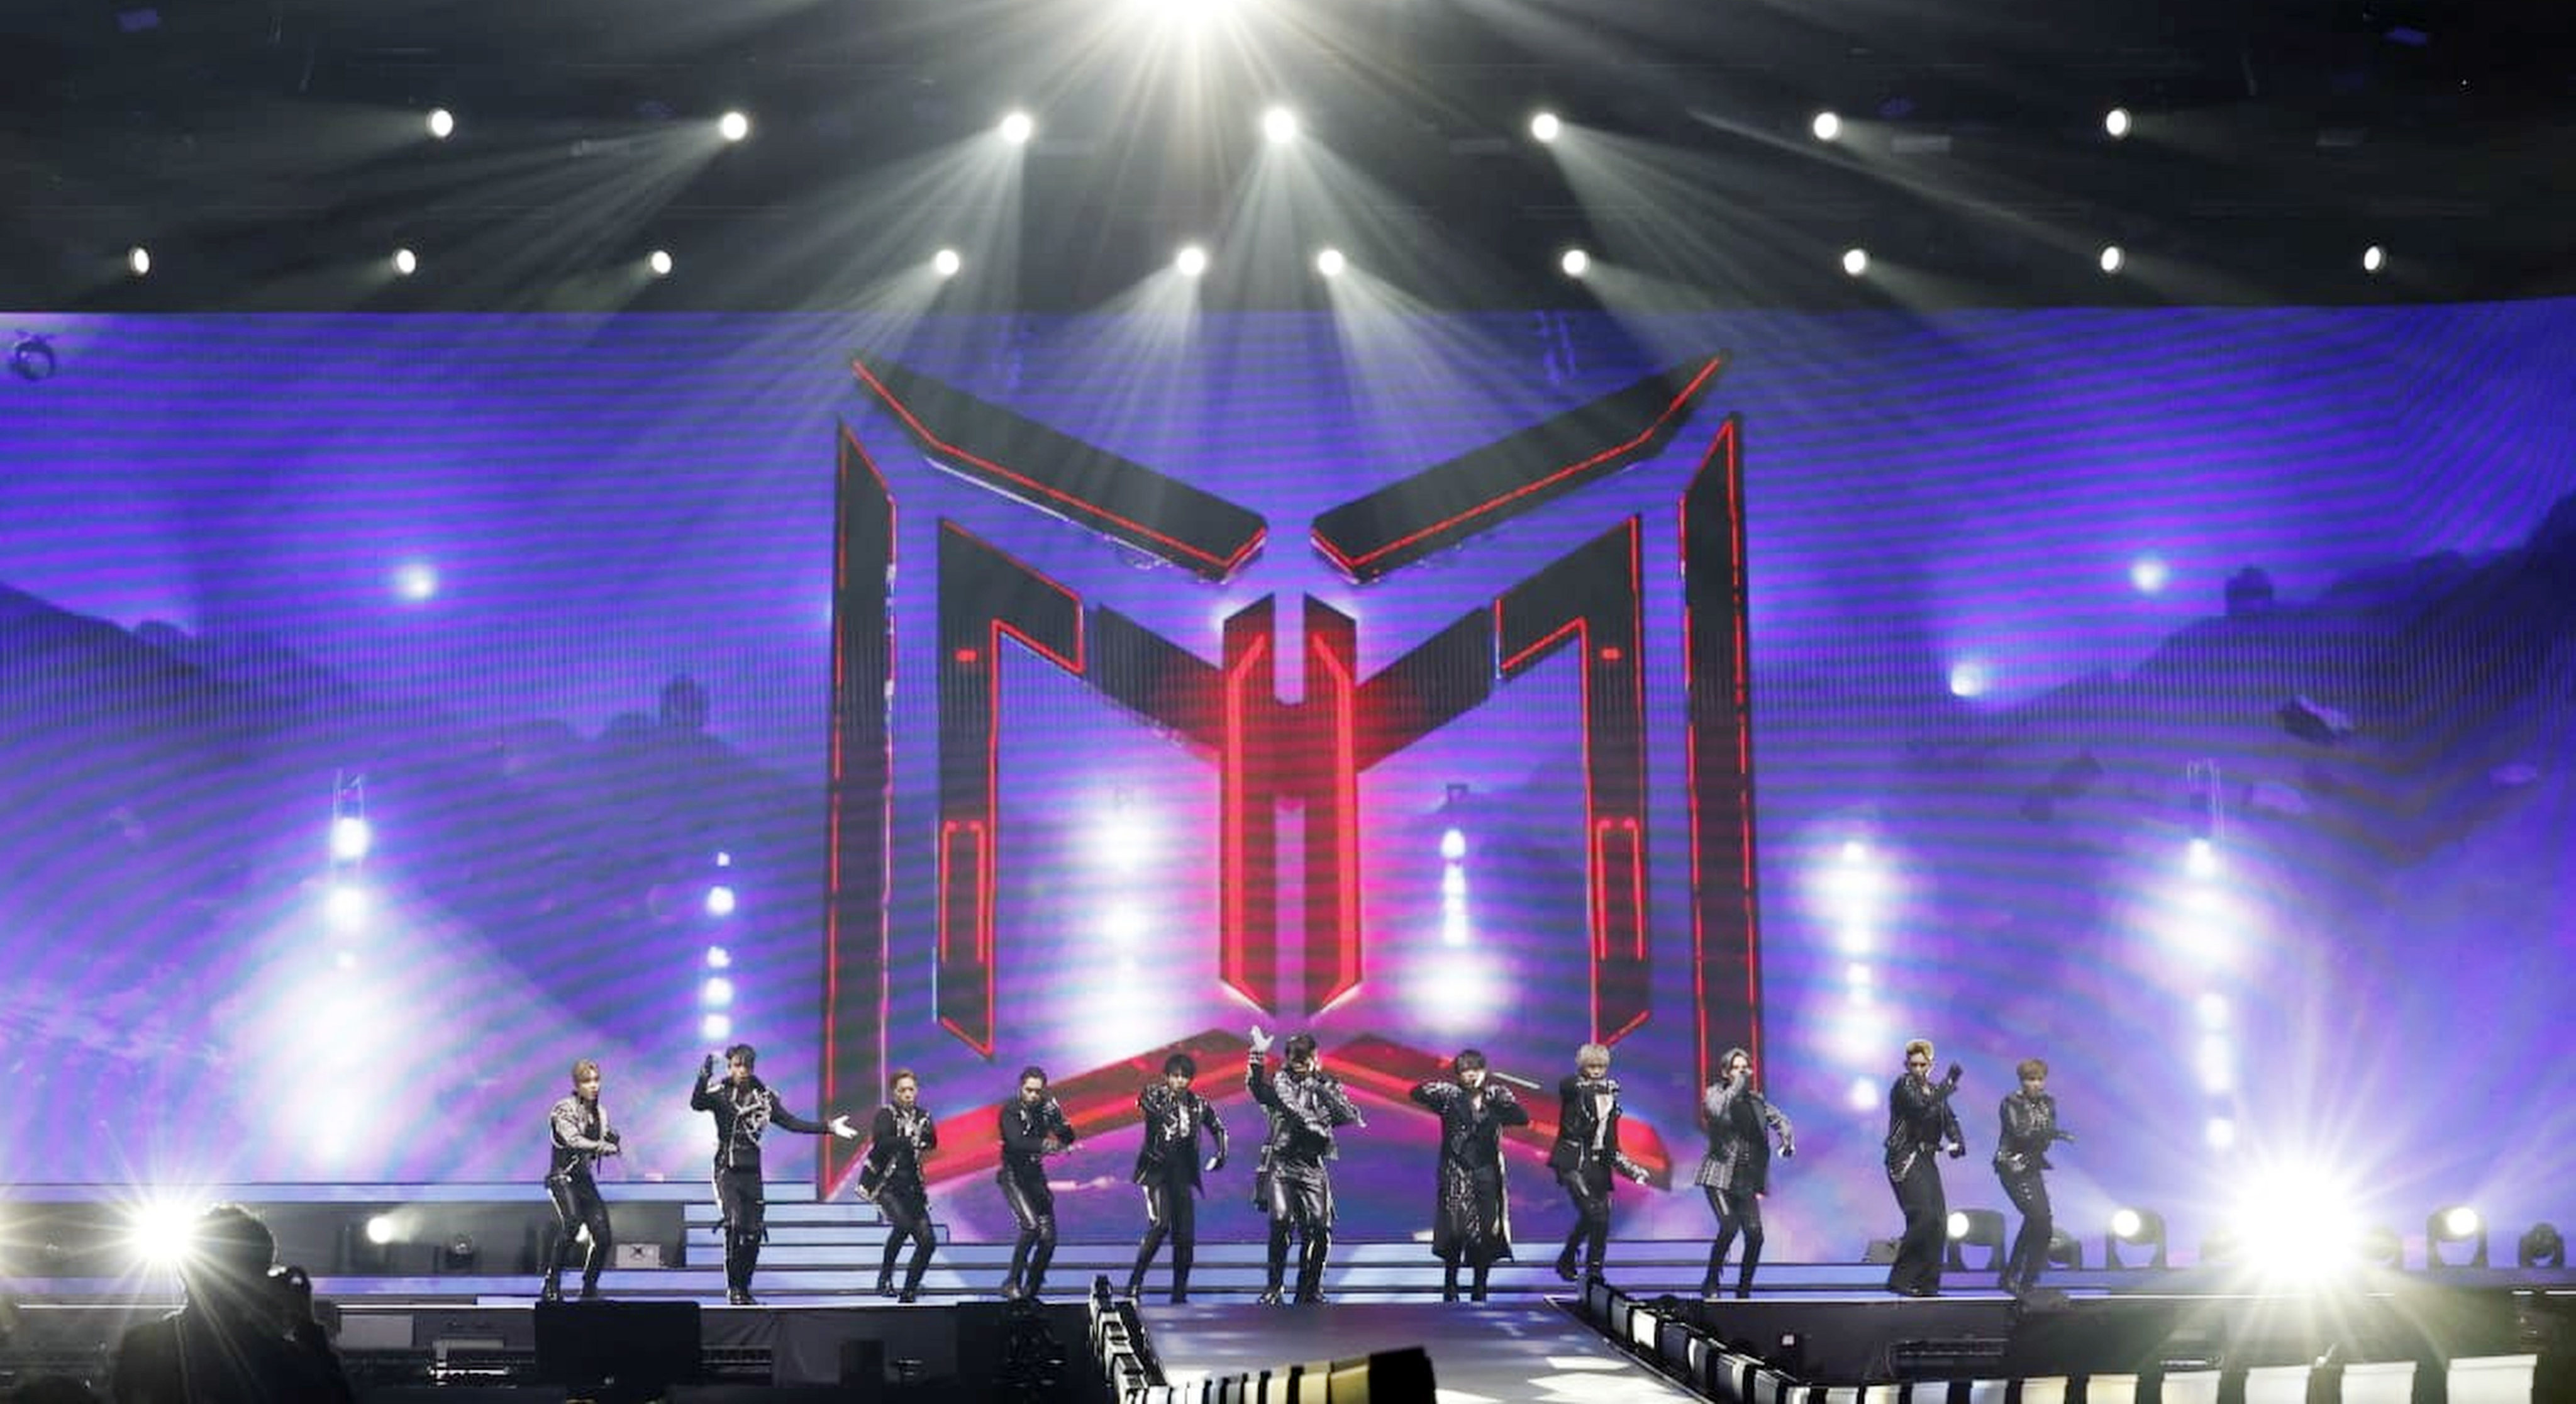 The popular 12-member boy band Mirror kicks off its comeback concert series with 16 sold-out performances from January 15 to February 3 at the Asia-World Expo. Photo: Handout